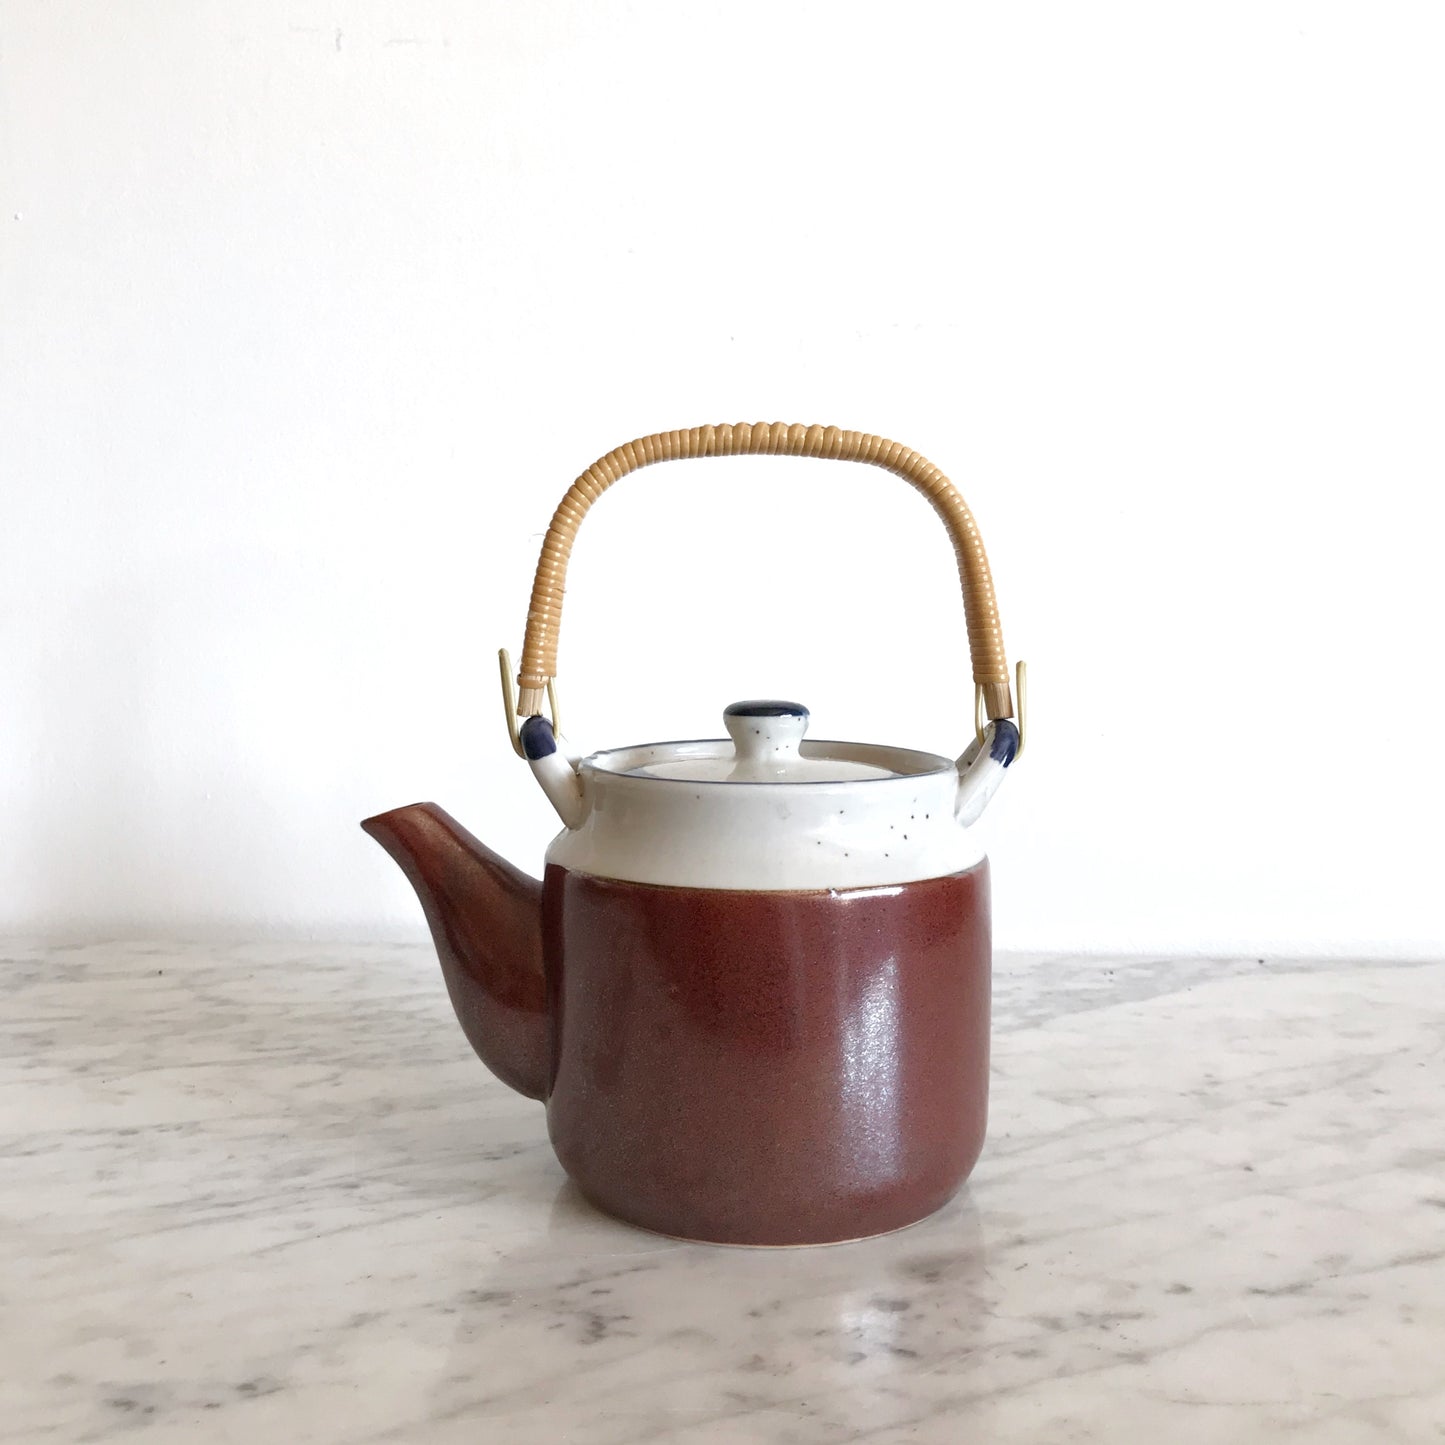 Vintage Ceramic Teapot with Wicker Handle